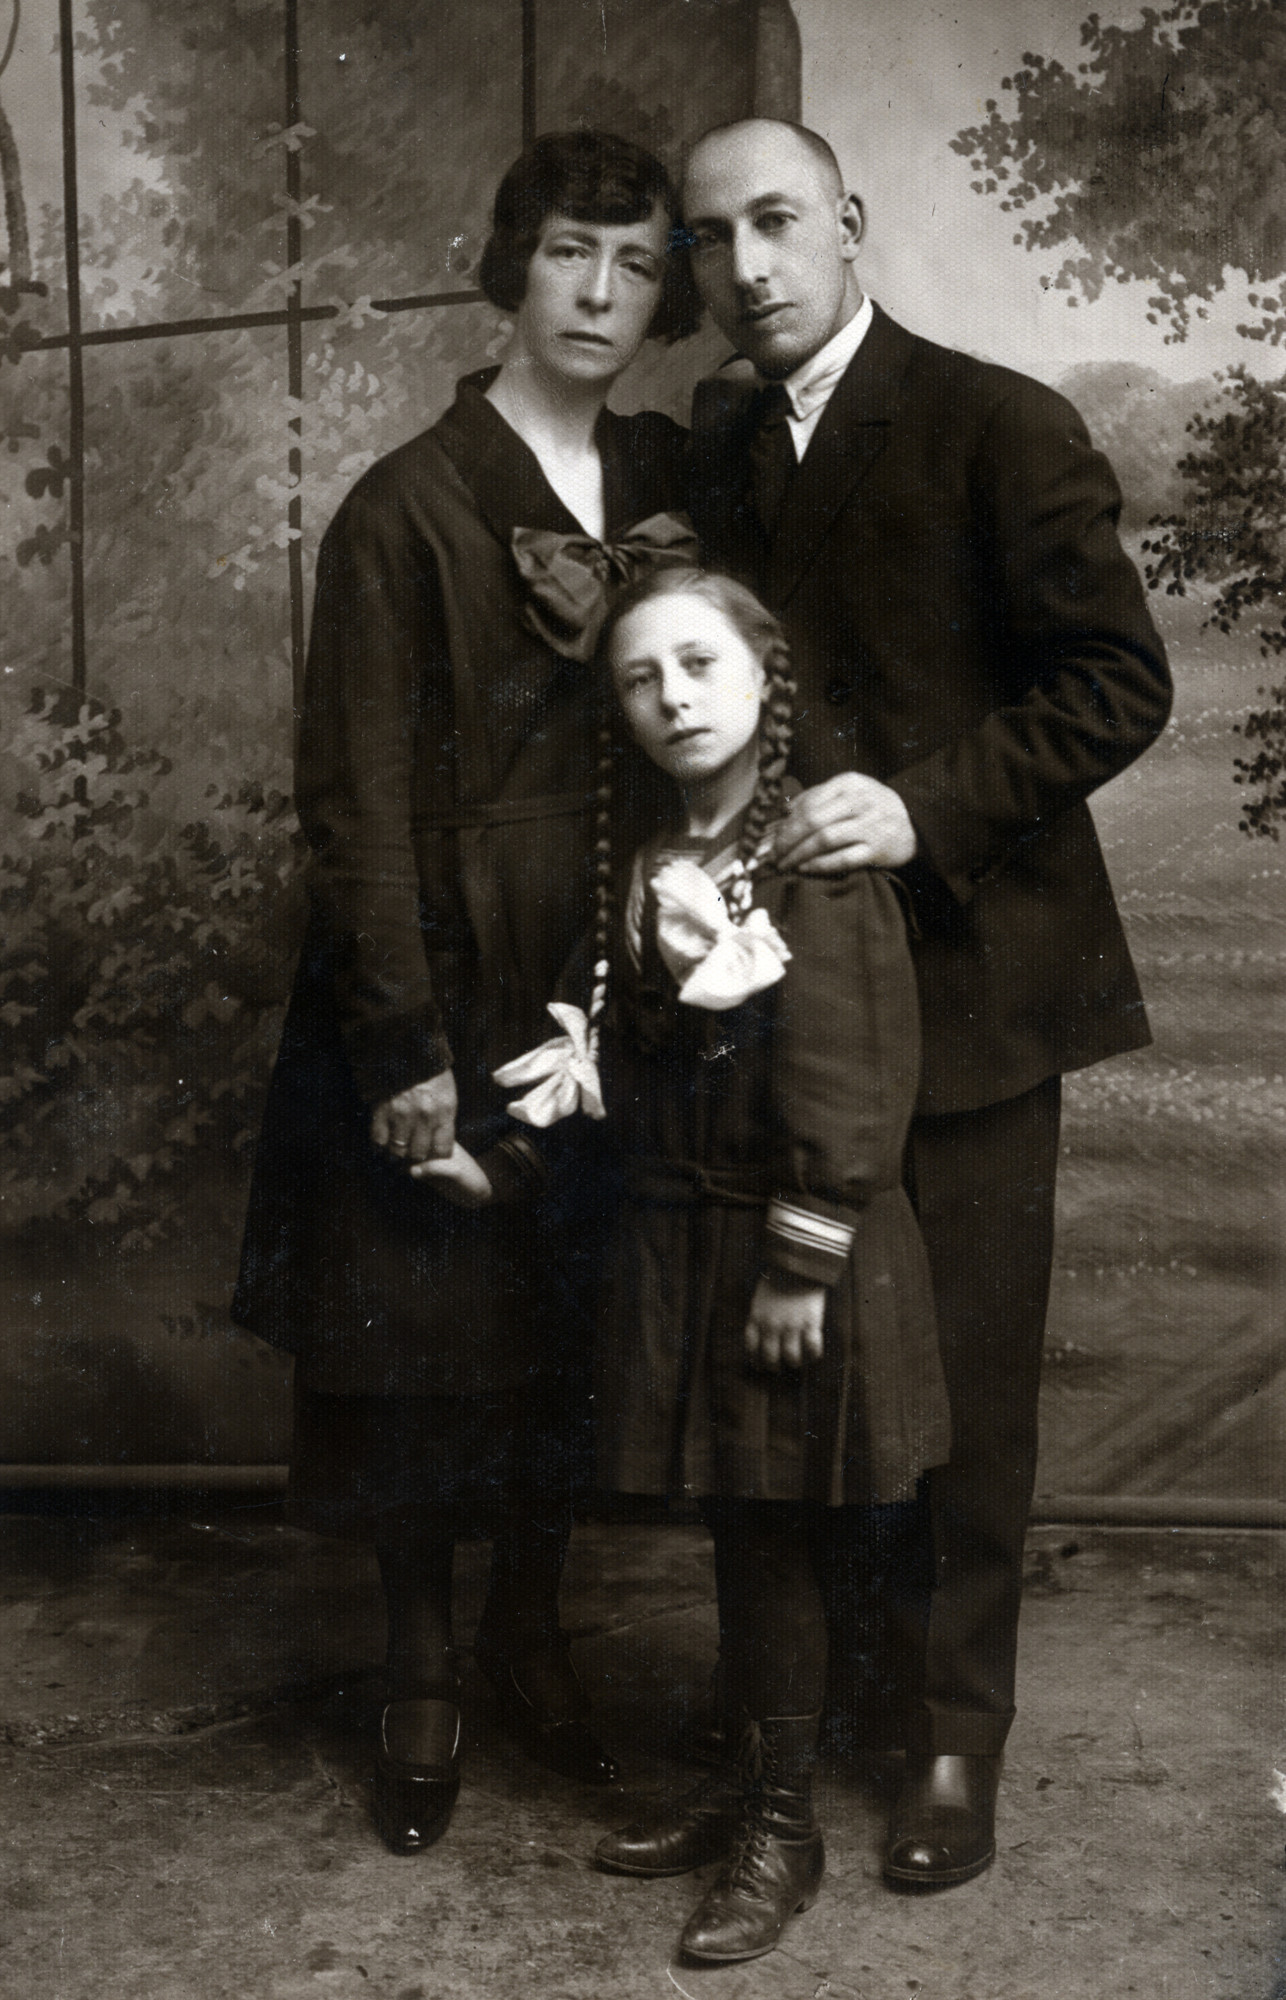 Studio portrait of the Muller family in Lida.

Pictured are David and Hegwig Muller, with their daughter Zenia.